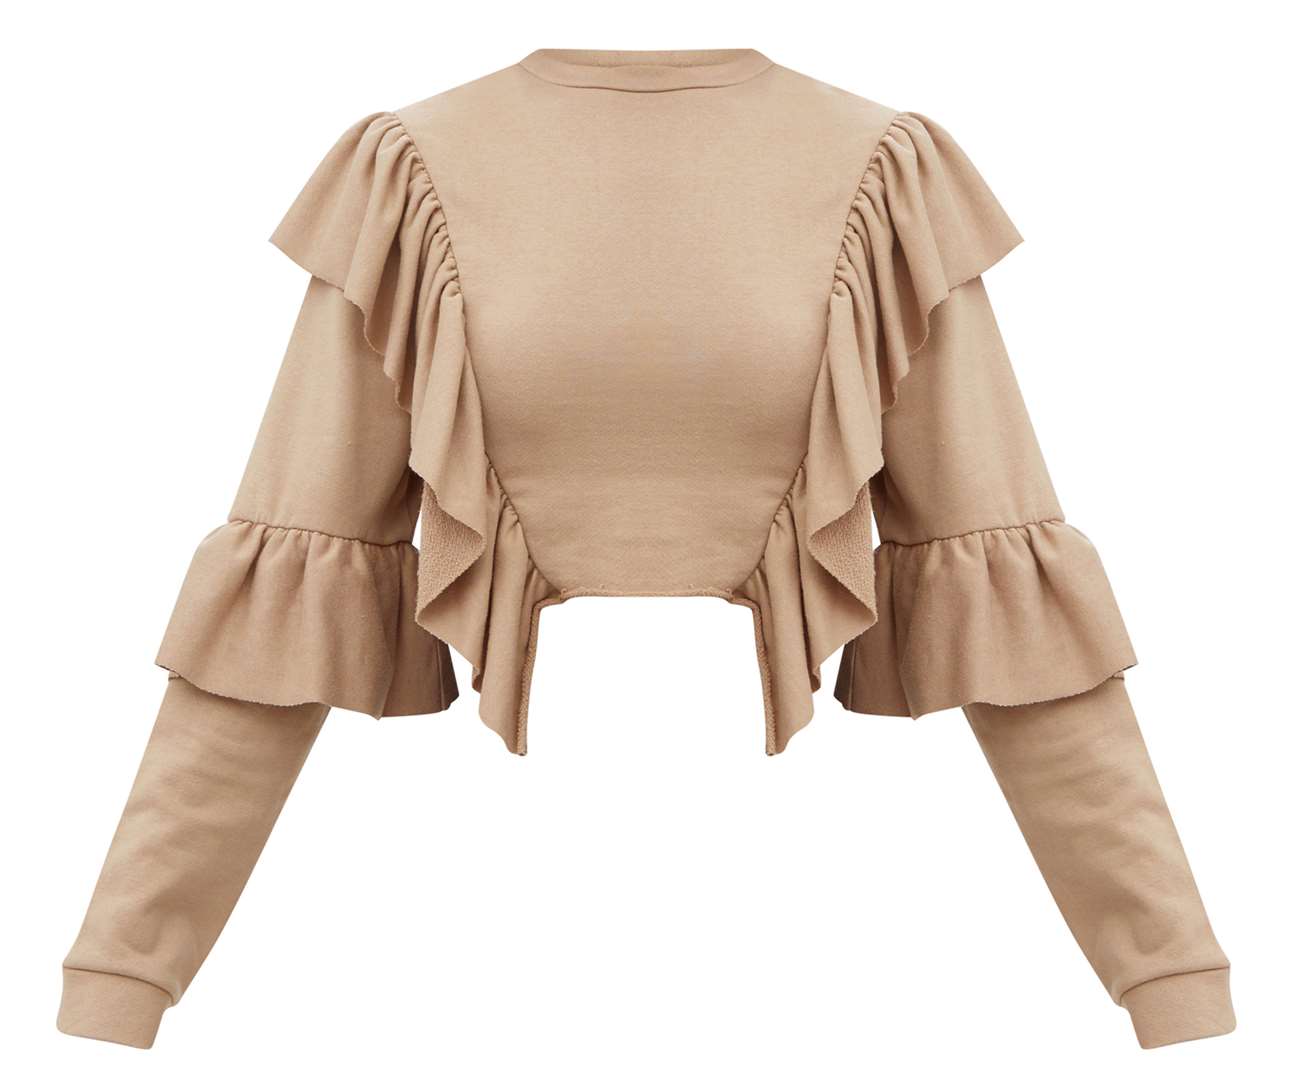 Taupe Ruffle Frill Crop Sweater, £18, available from PrettyLittleThing.com